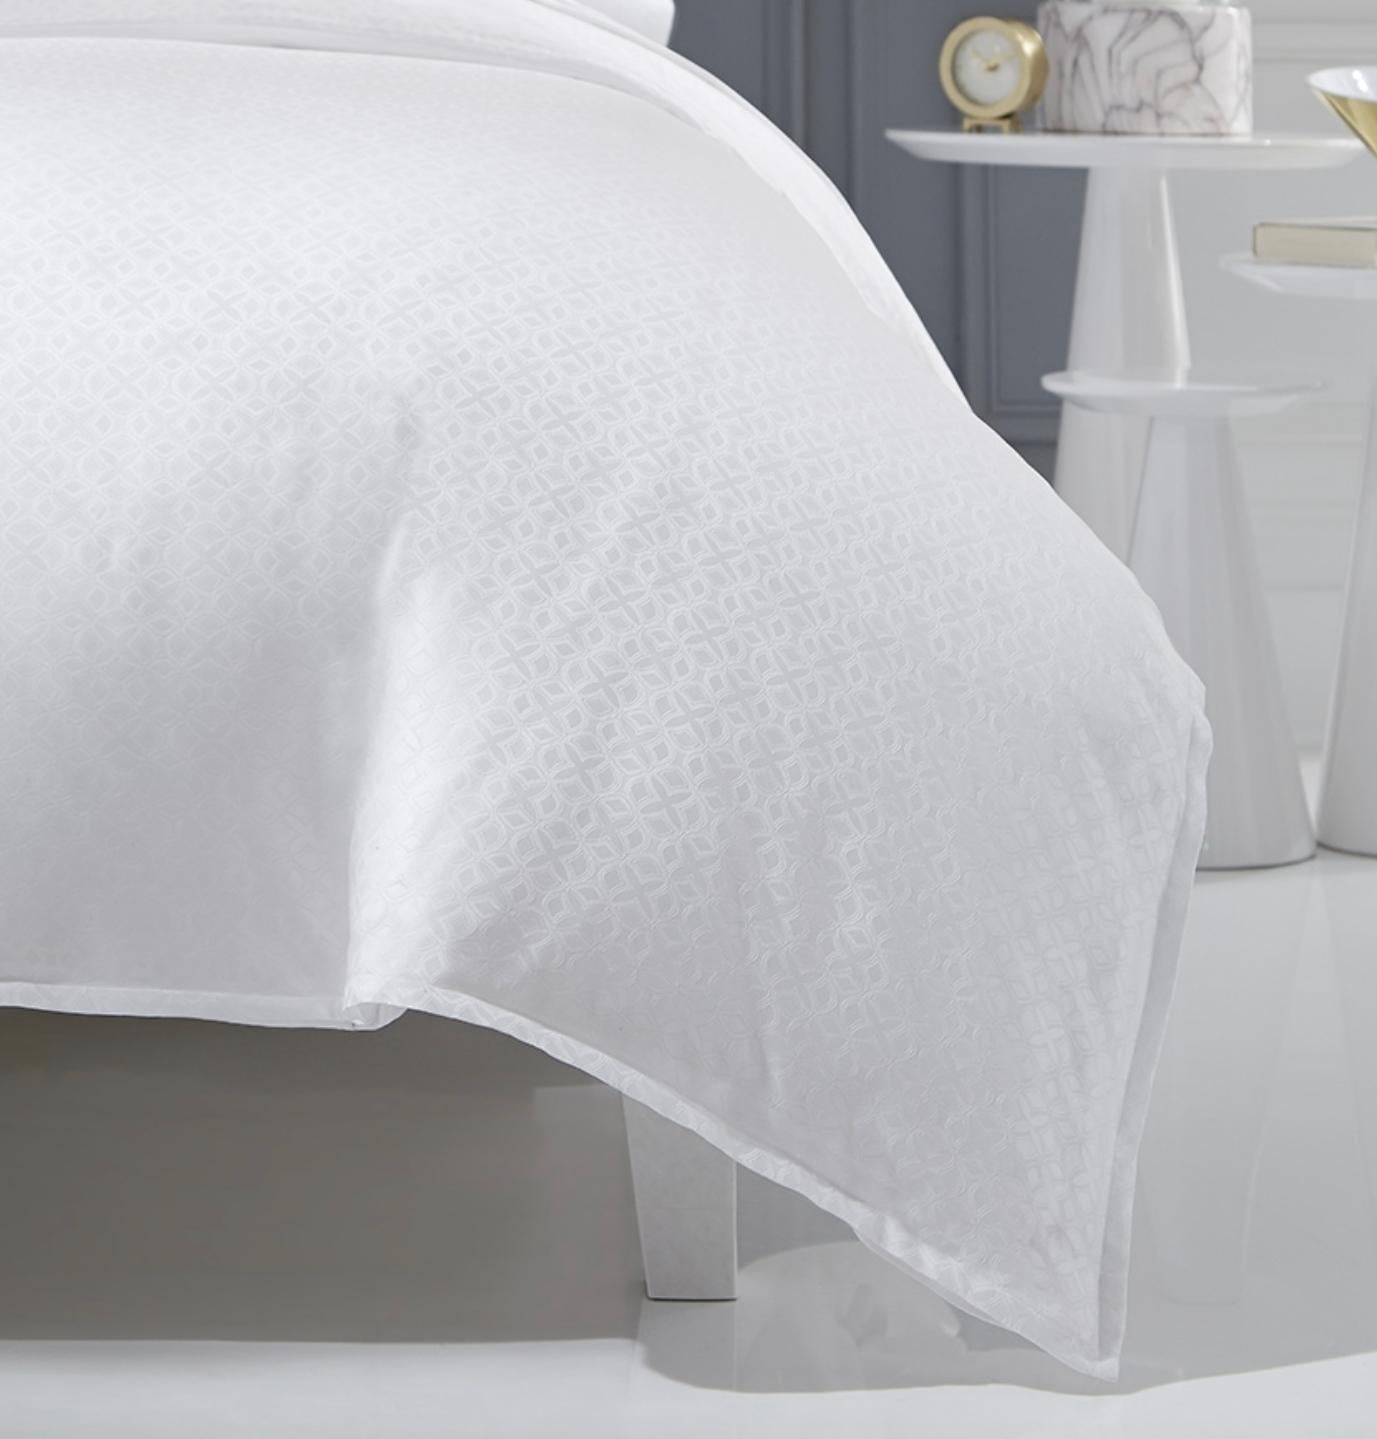 Sferra Giza 45 Quatrefoil collection cotton sateen jacquard duvet cover, white, Italy .
The Giza 45 collections are widely recognized as the finest bedding sheets in the world, weaving together the rarest of Egyptian Giza 45 cottons. This highly